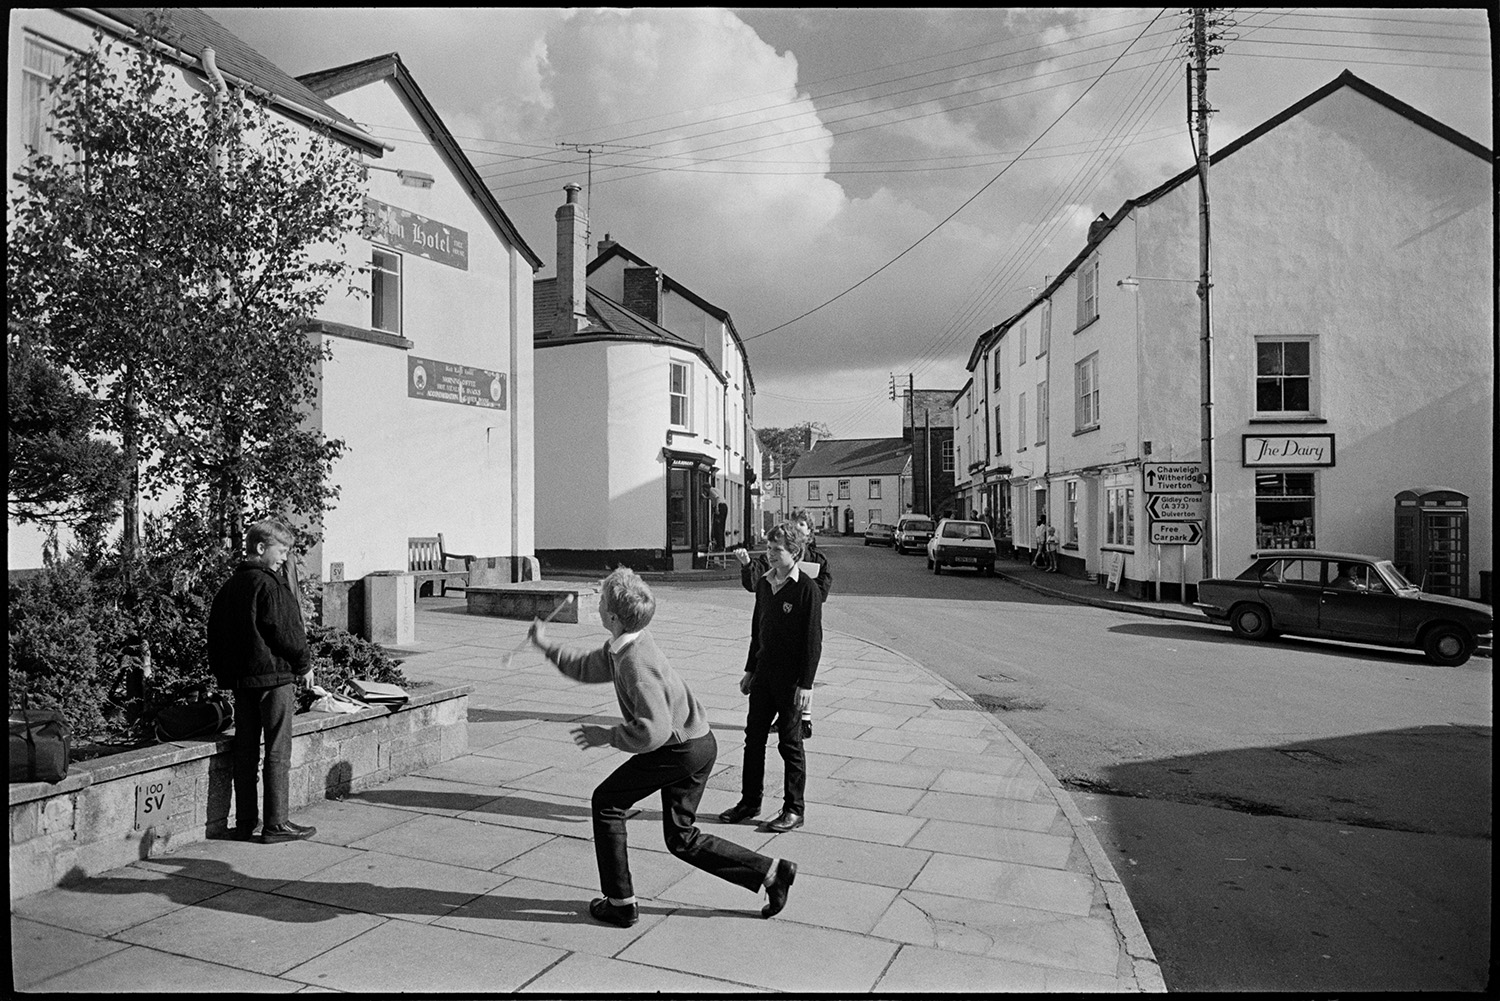 Street scenes with children practising throwing a baton.
[Children practising throwing a baton on a street corner in Chulmleigh. The Red Lion Hotel is in the background with town houses, a telephone kiosk, and The Dairy shop front.]